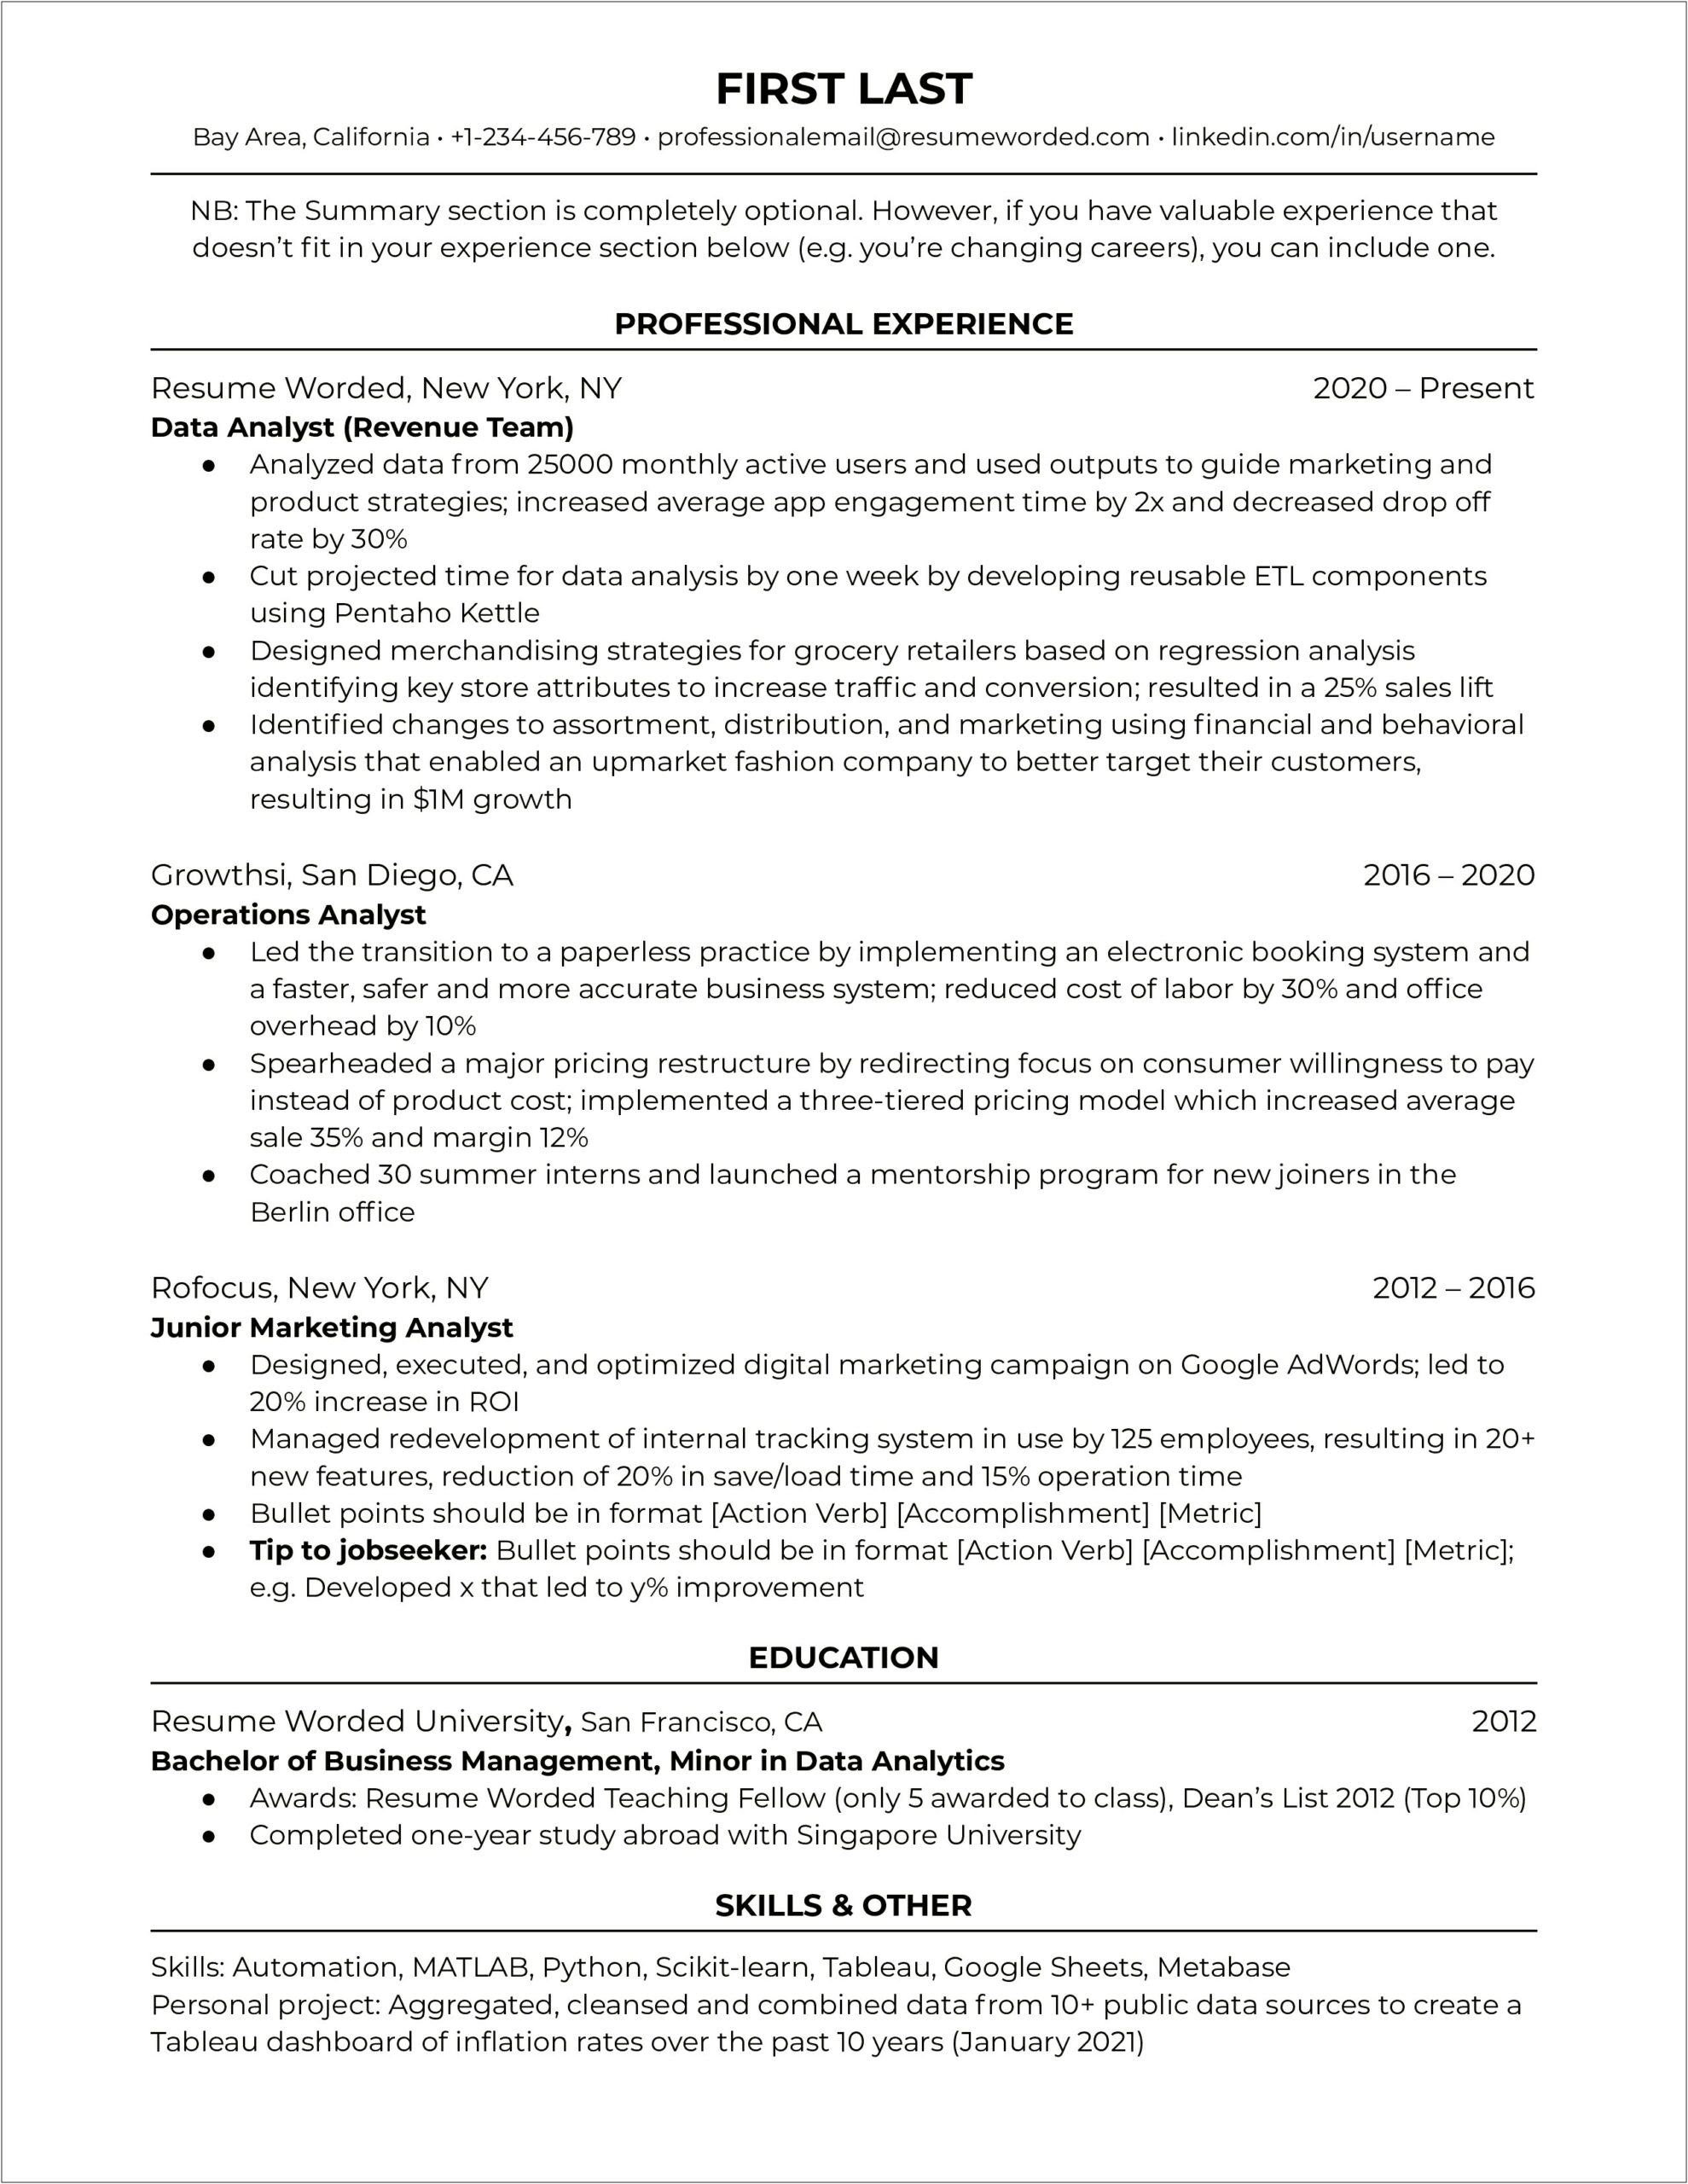 Reporting And Analytics Manager Sample Resume